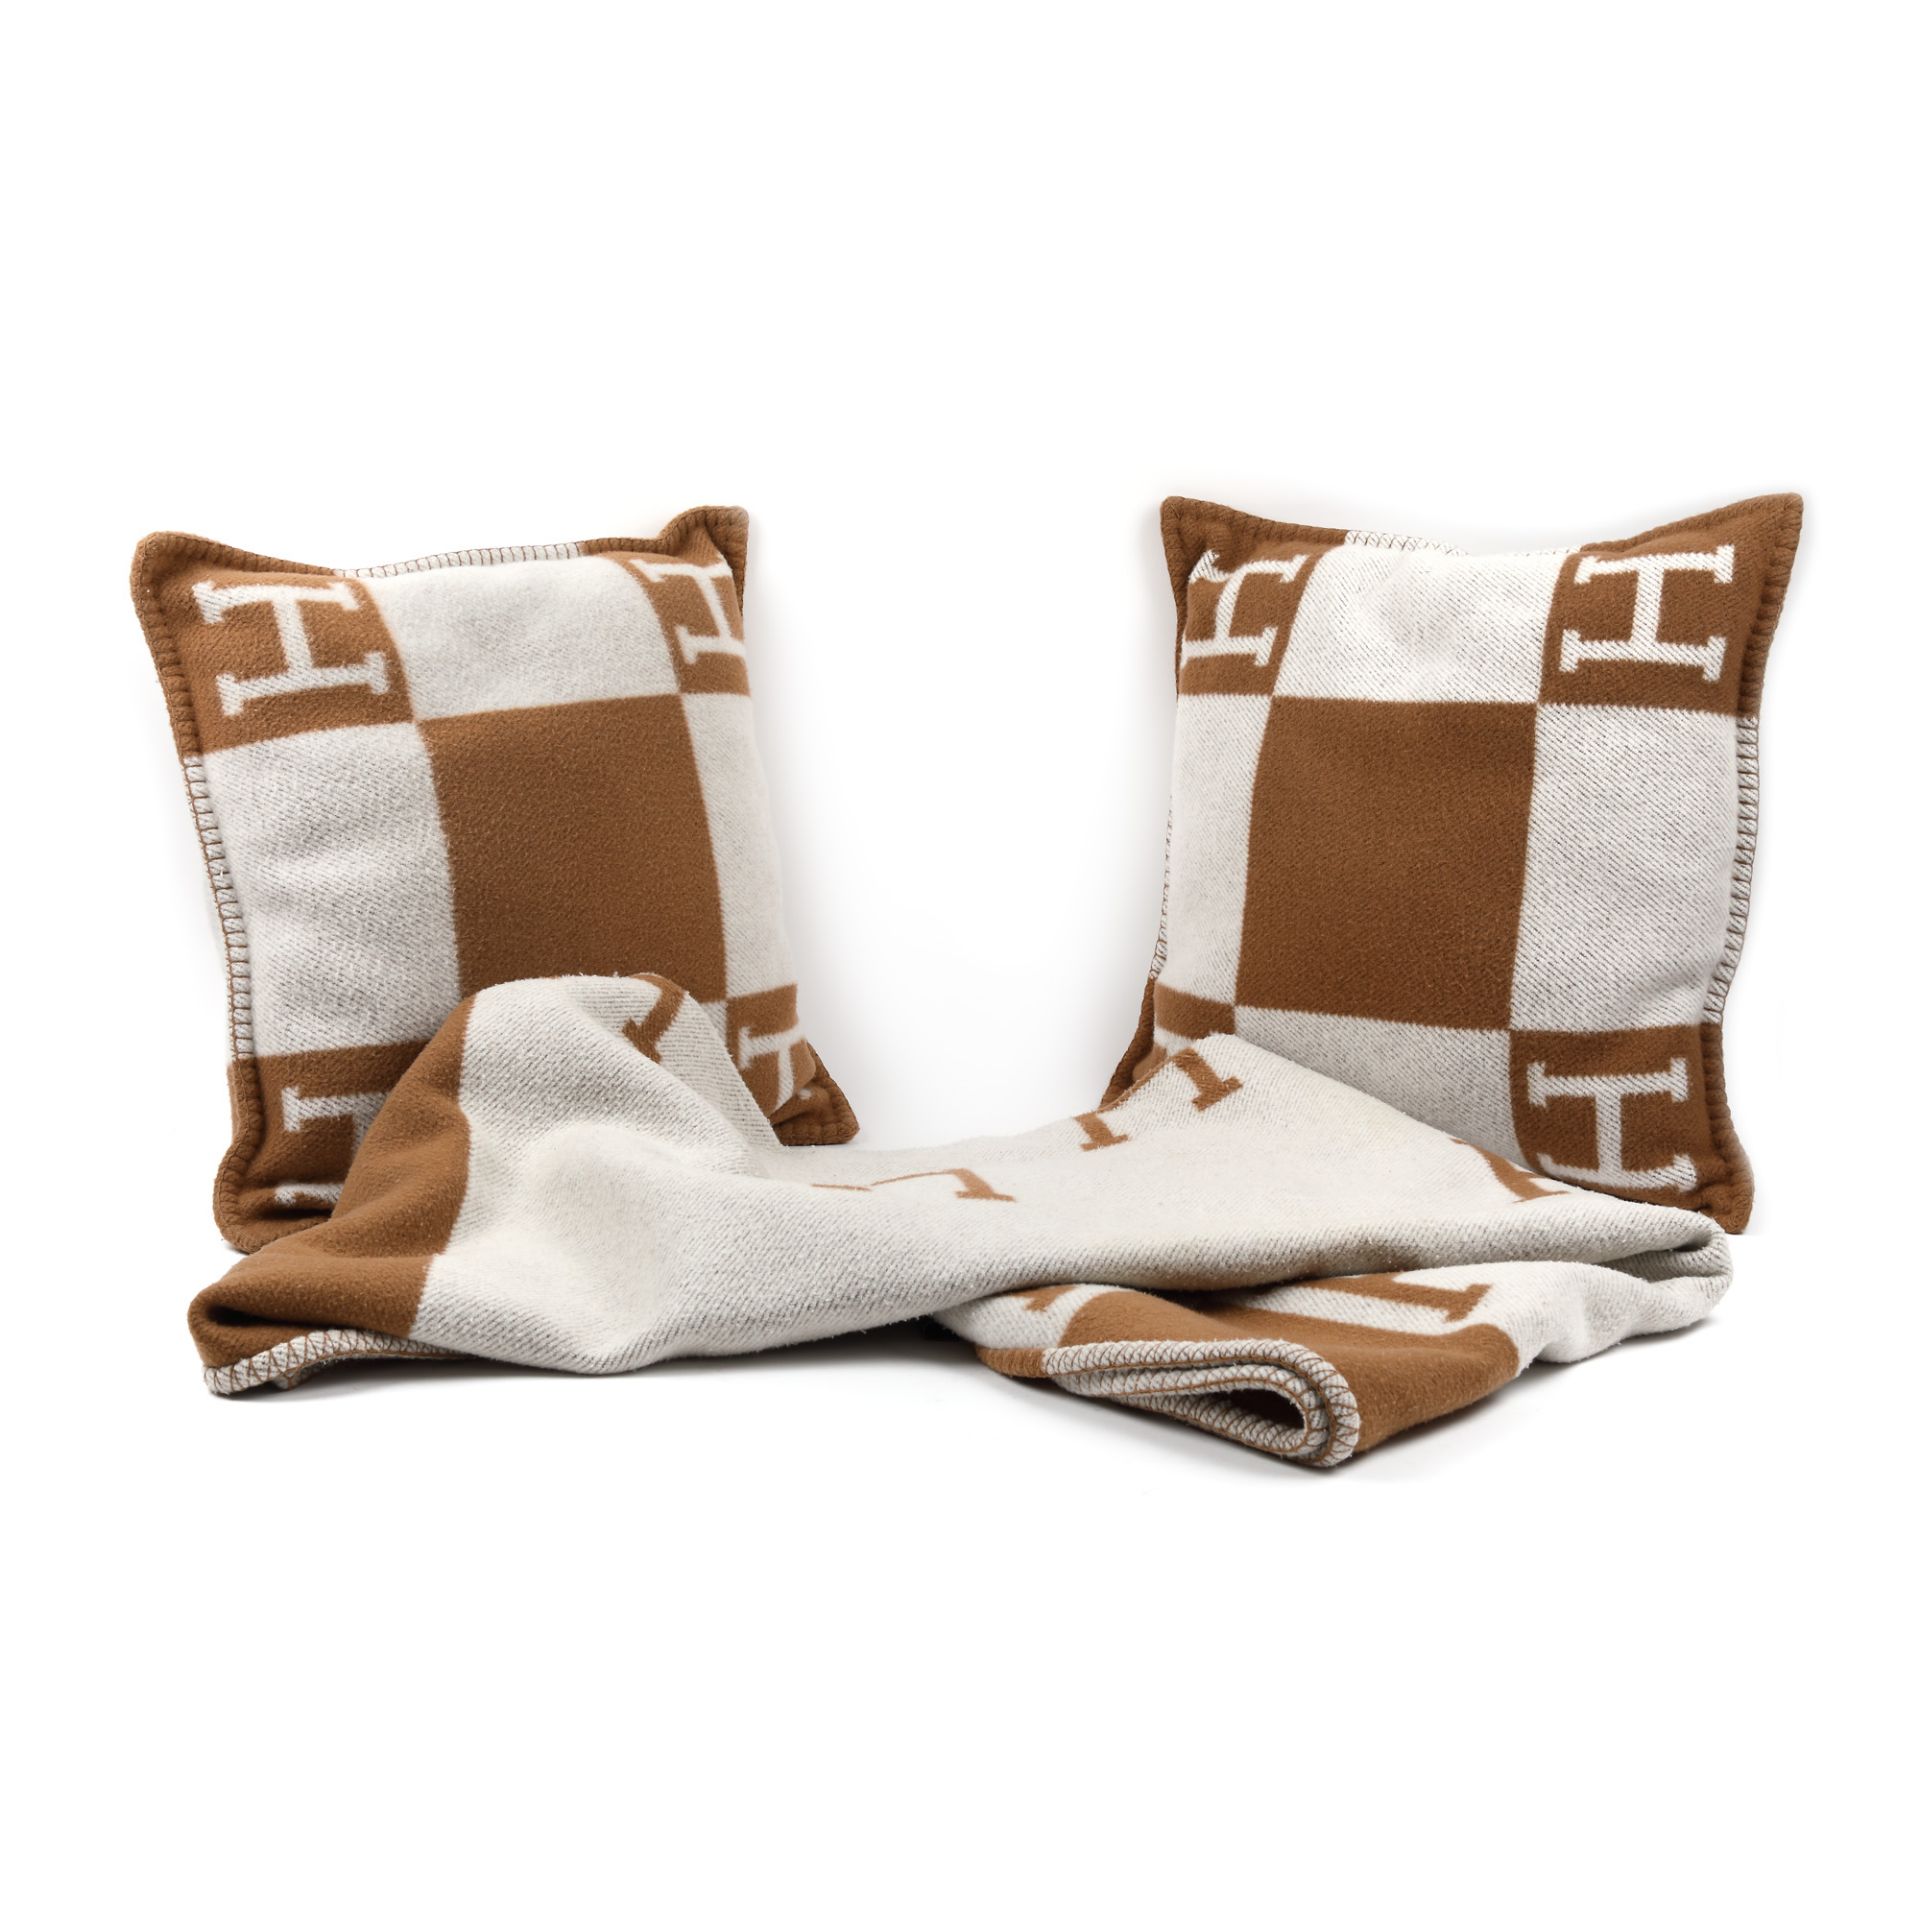 Herm?s set, consisting of a blanket and two pillows, wool and cashmere